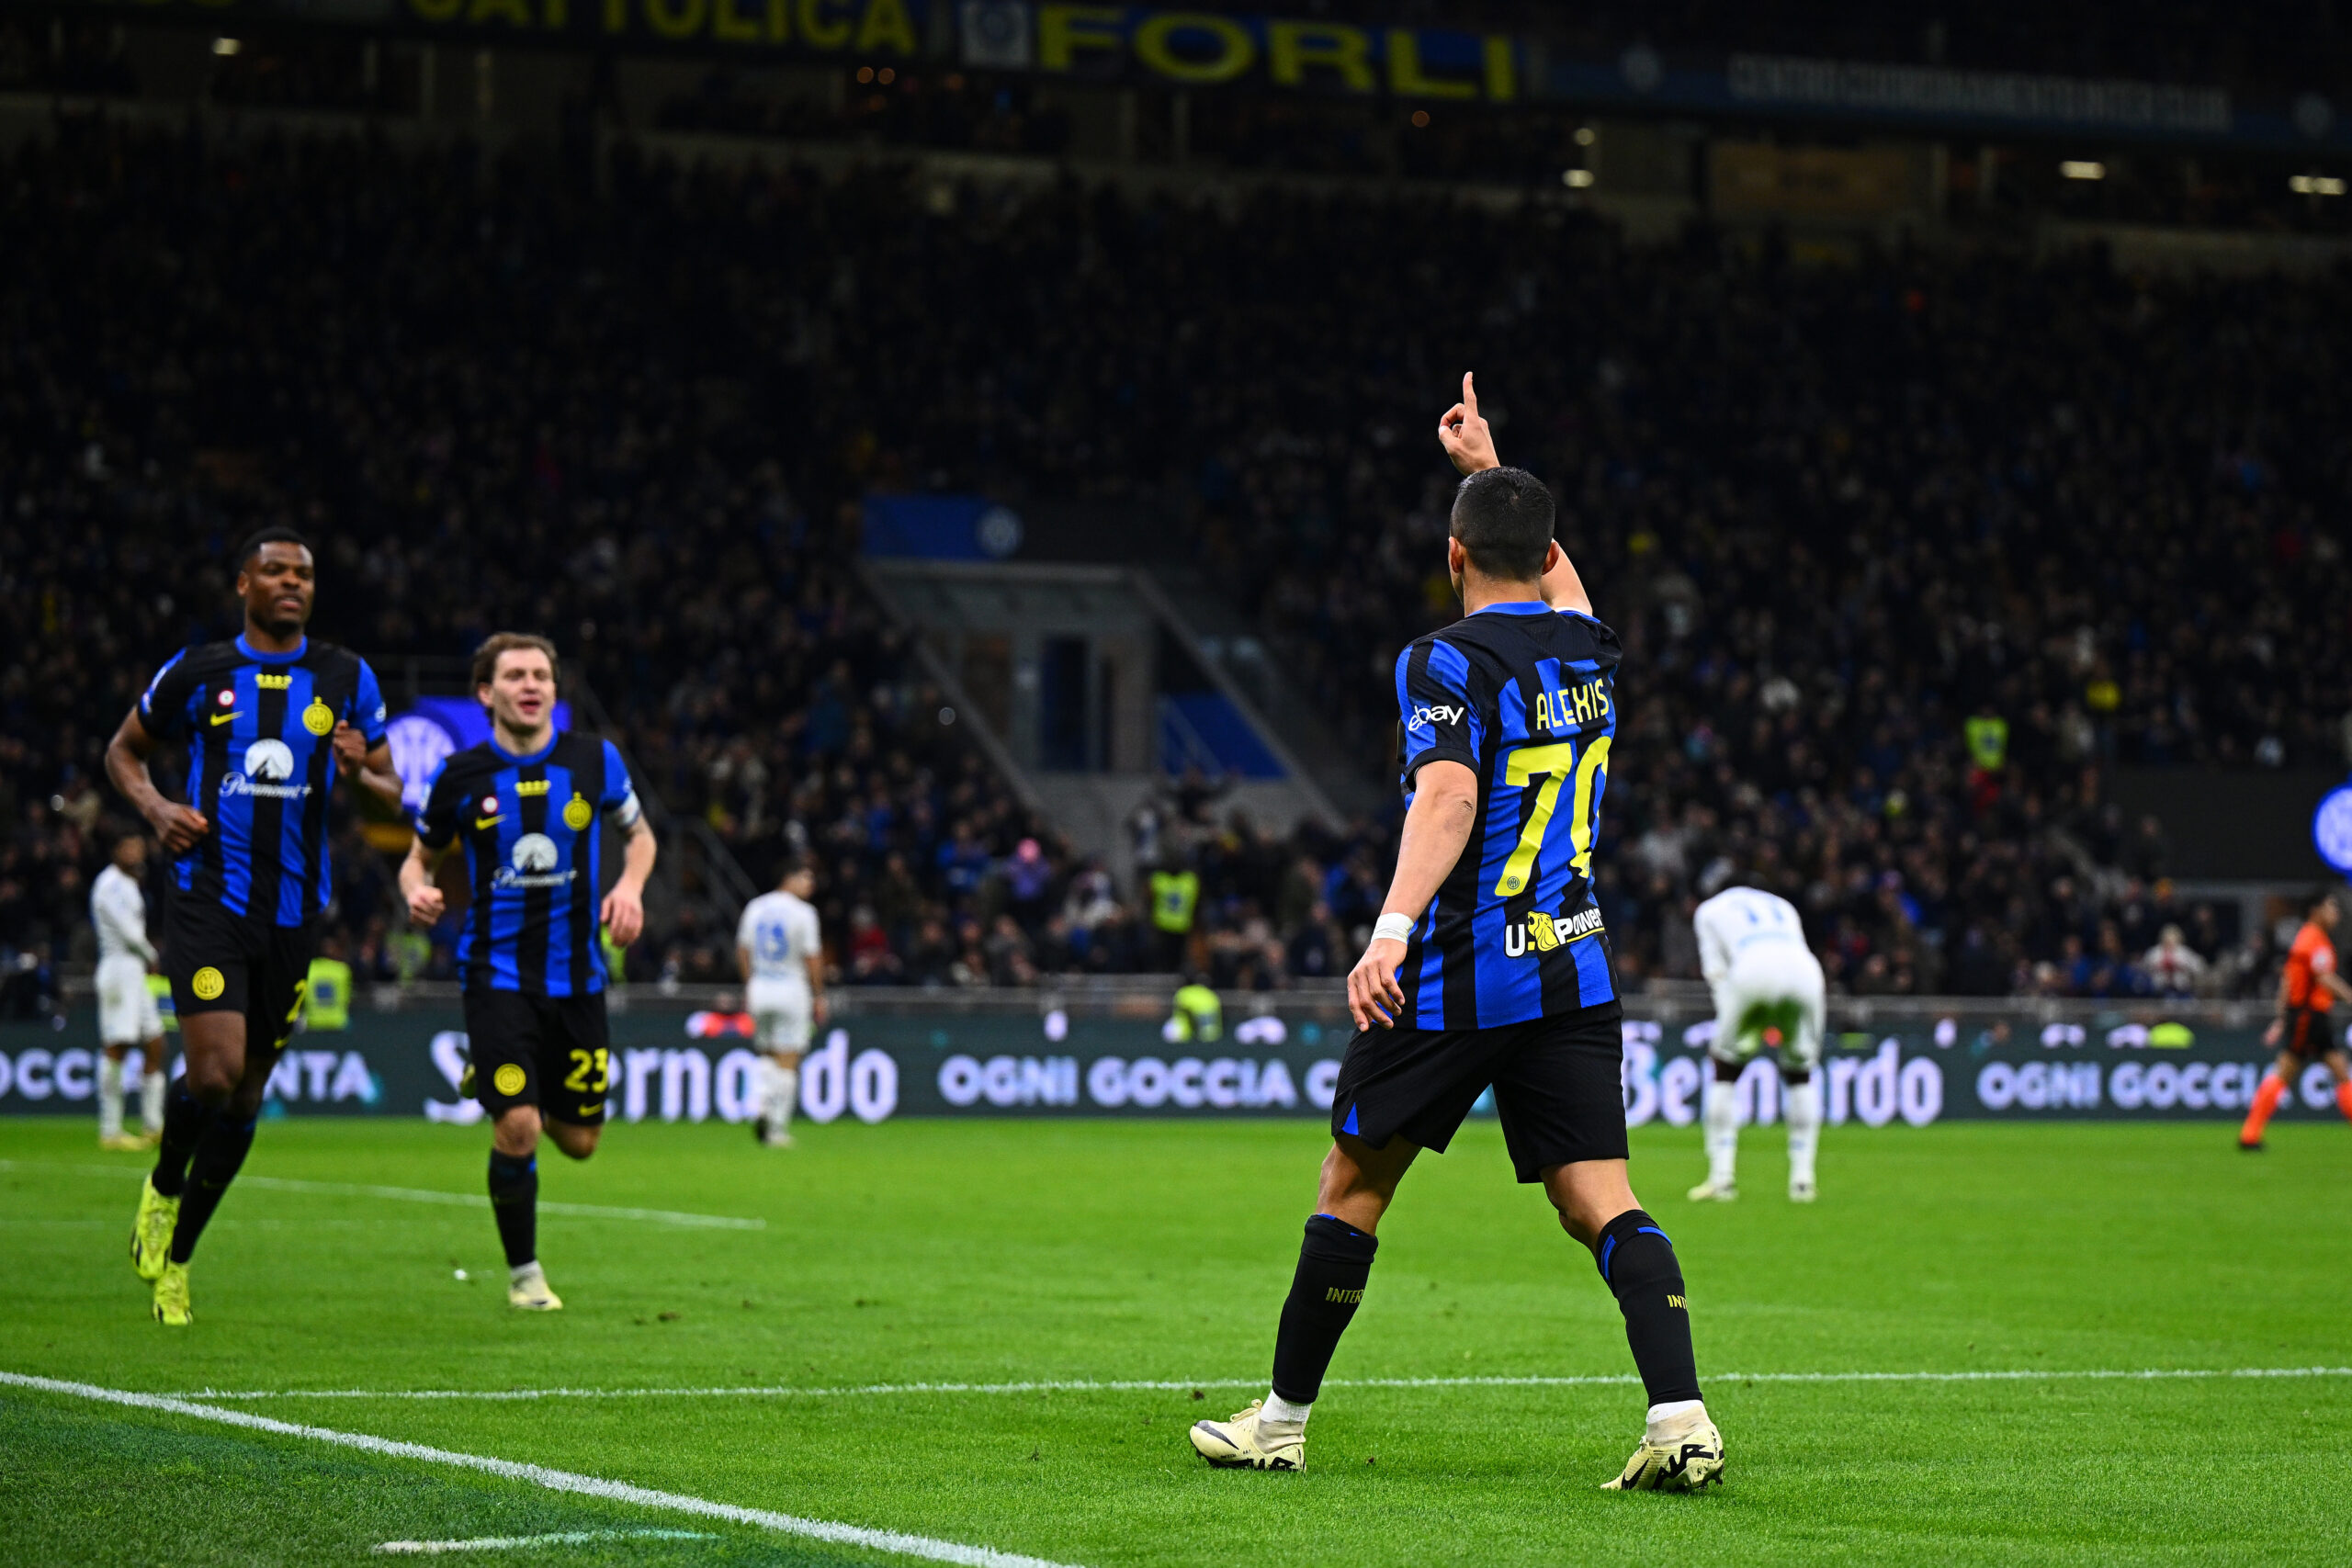 Inter Register A Few New Records in Victory over Empoli